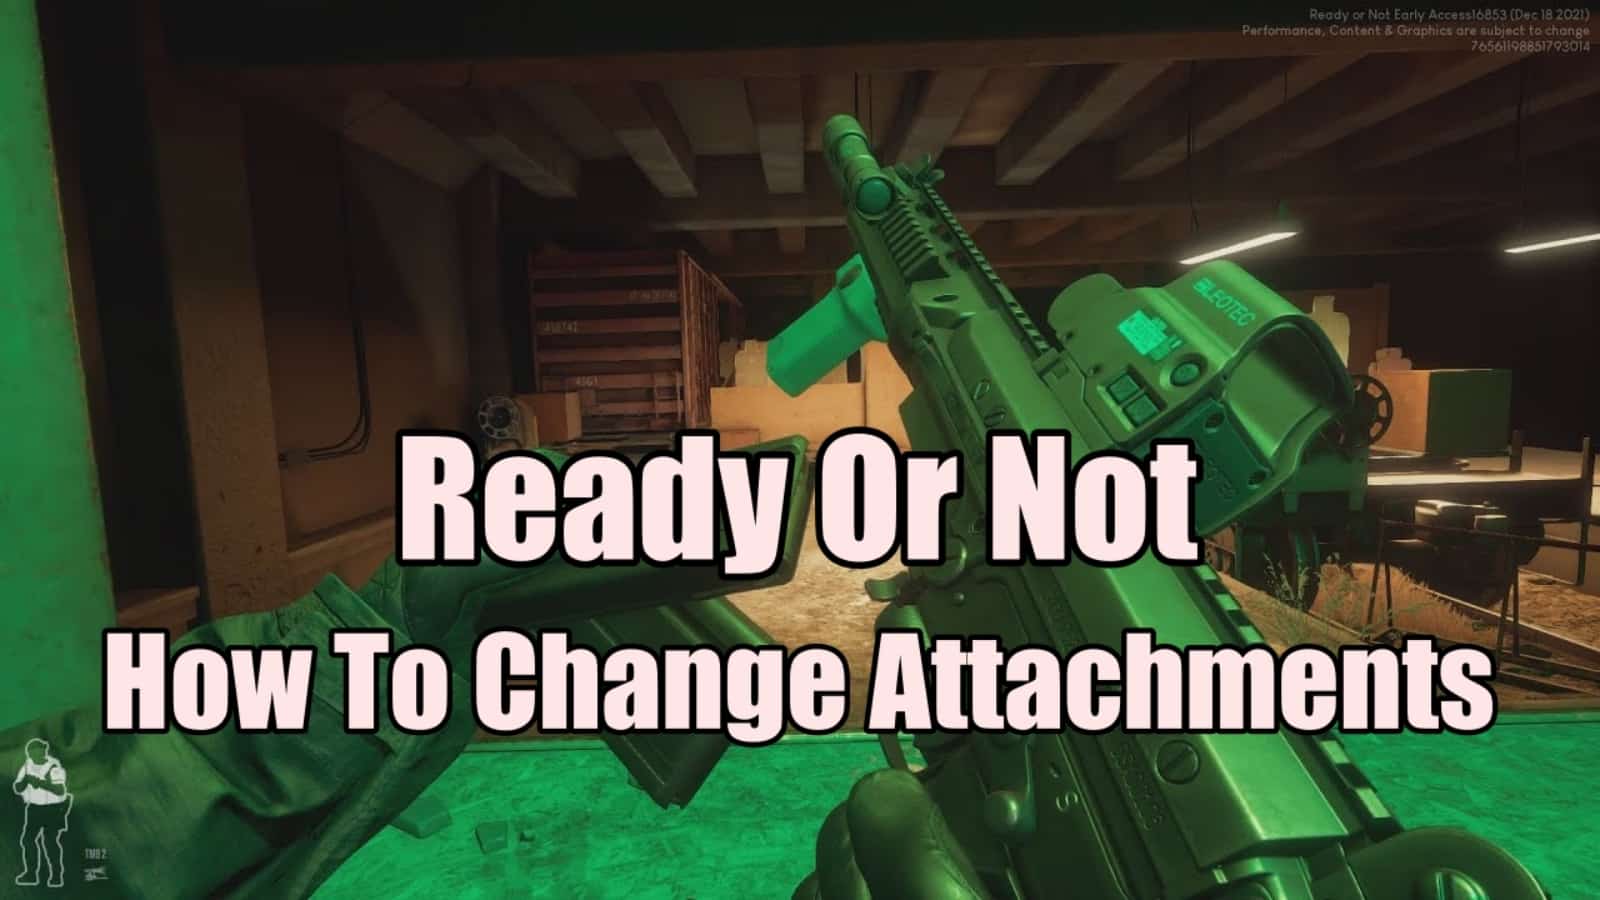 Ready or Not how to change gun attachments